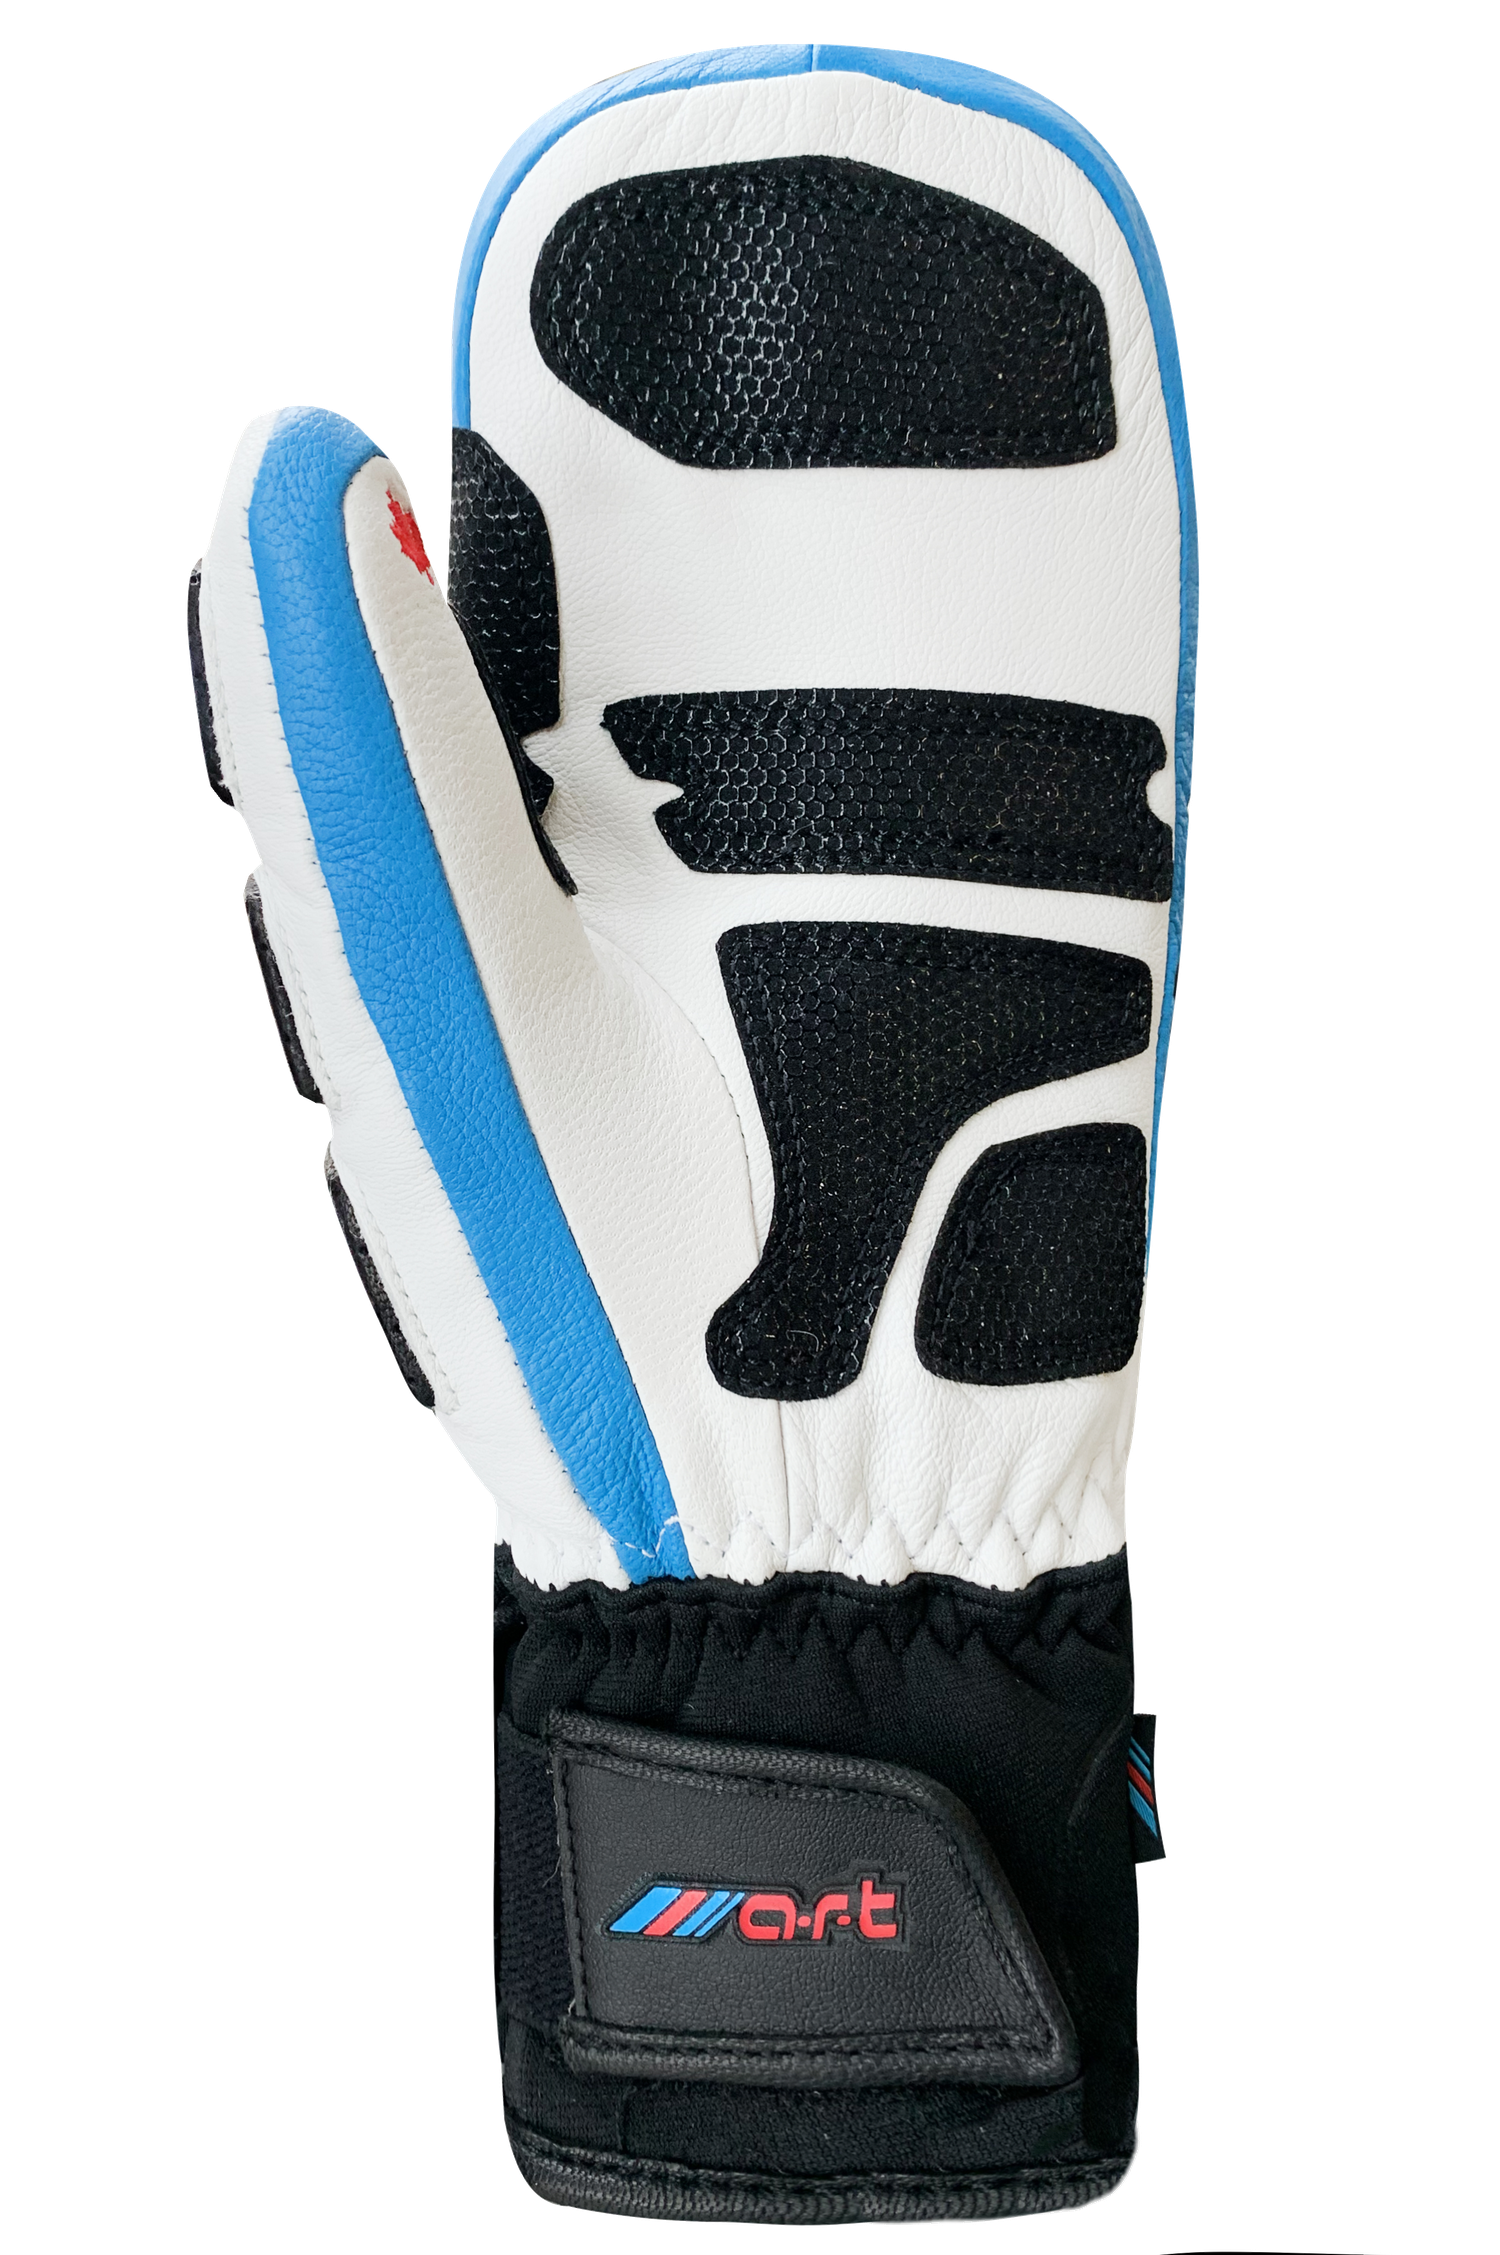 Race Fusion Fingermitts - Adult, White/Blue